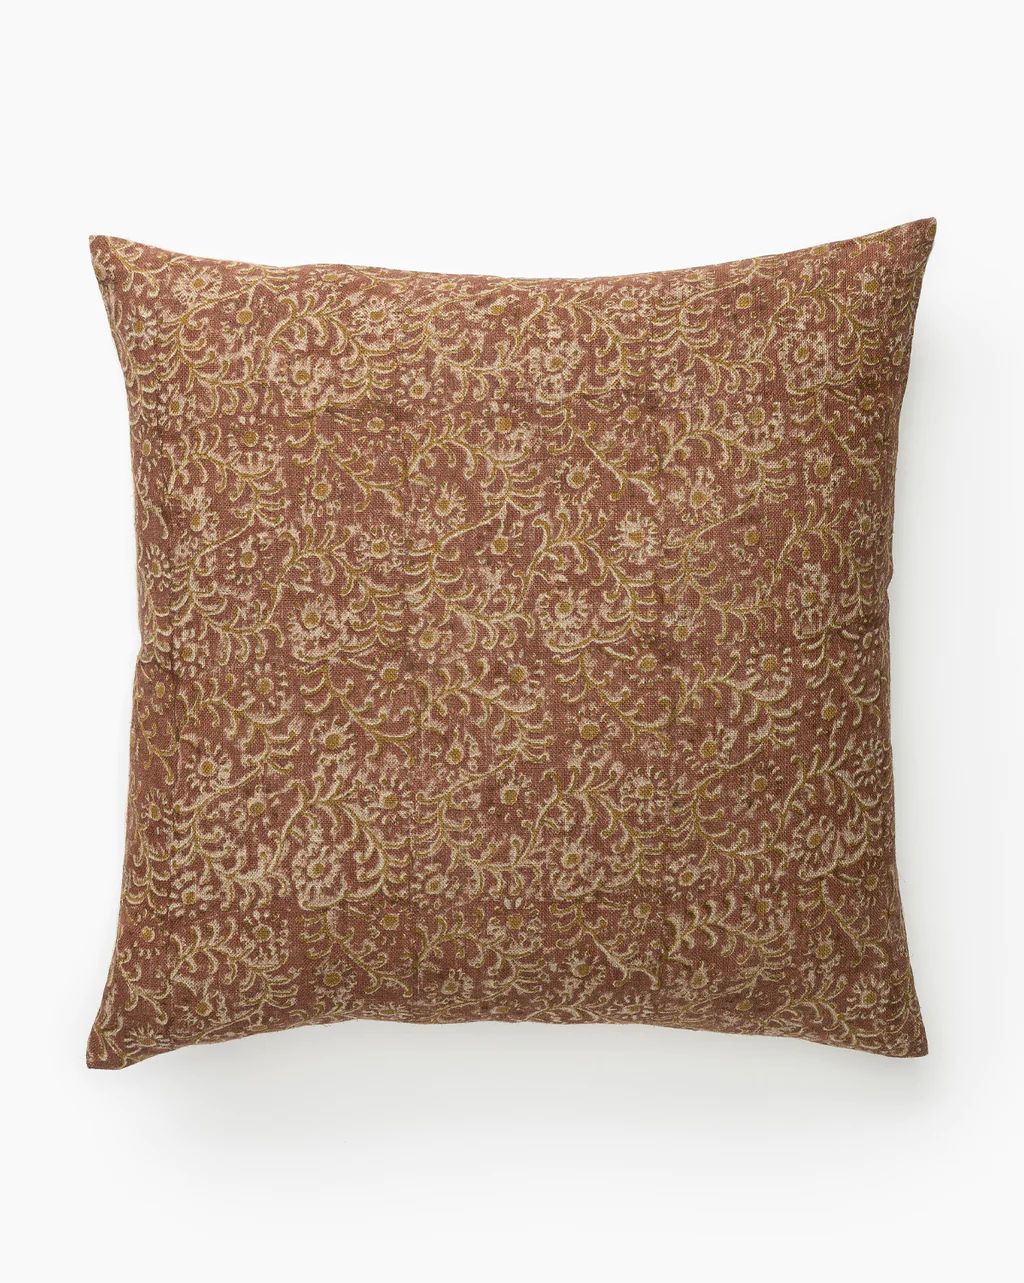 Catesby Pillow Cover | McGee & Co.